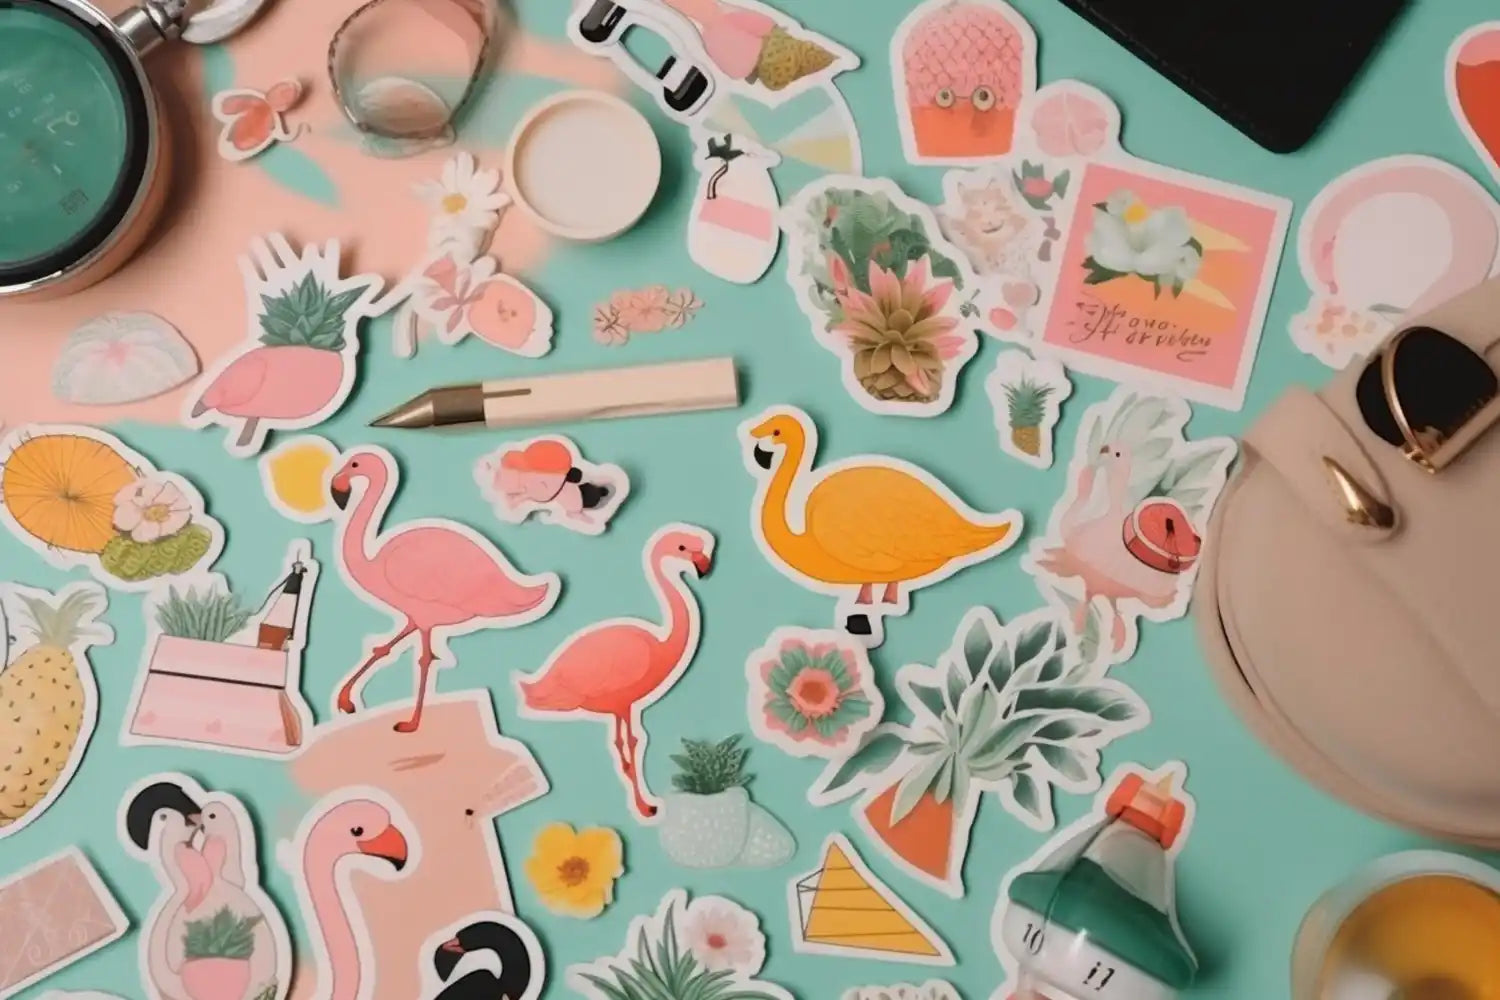 Exploring the Stickers Booklet: More Than Just Decoration